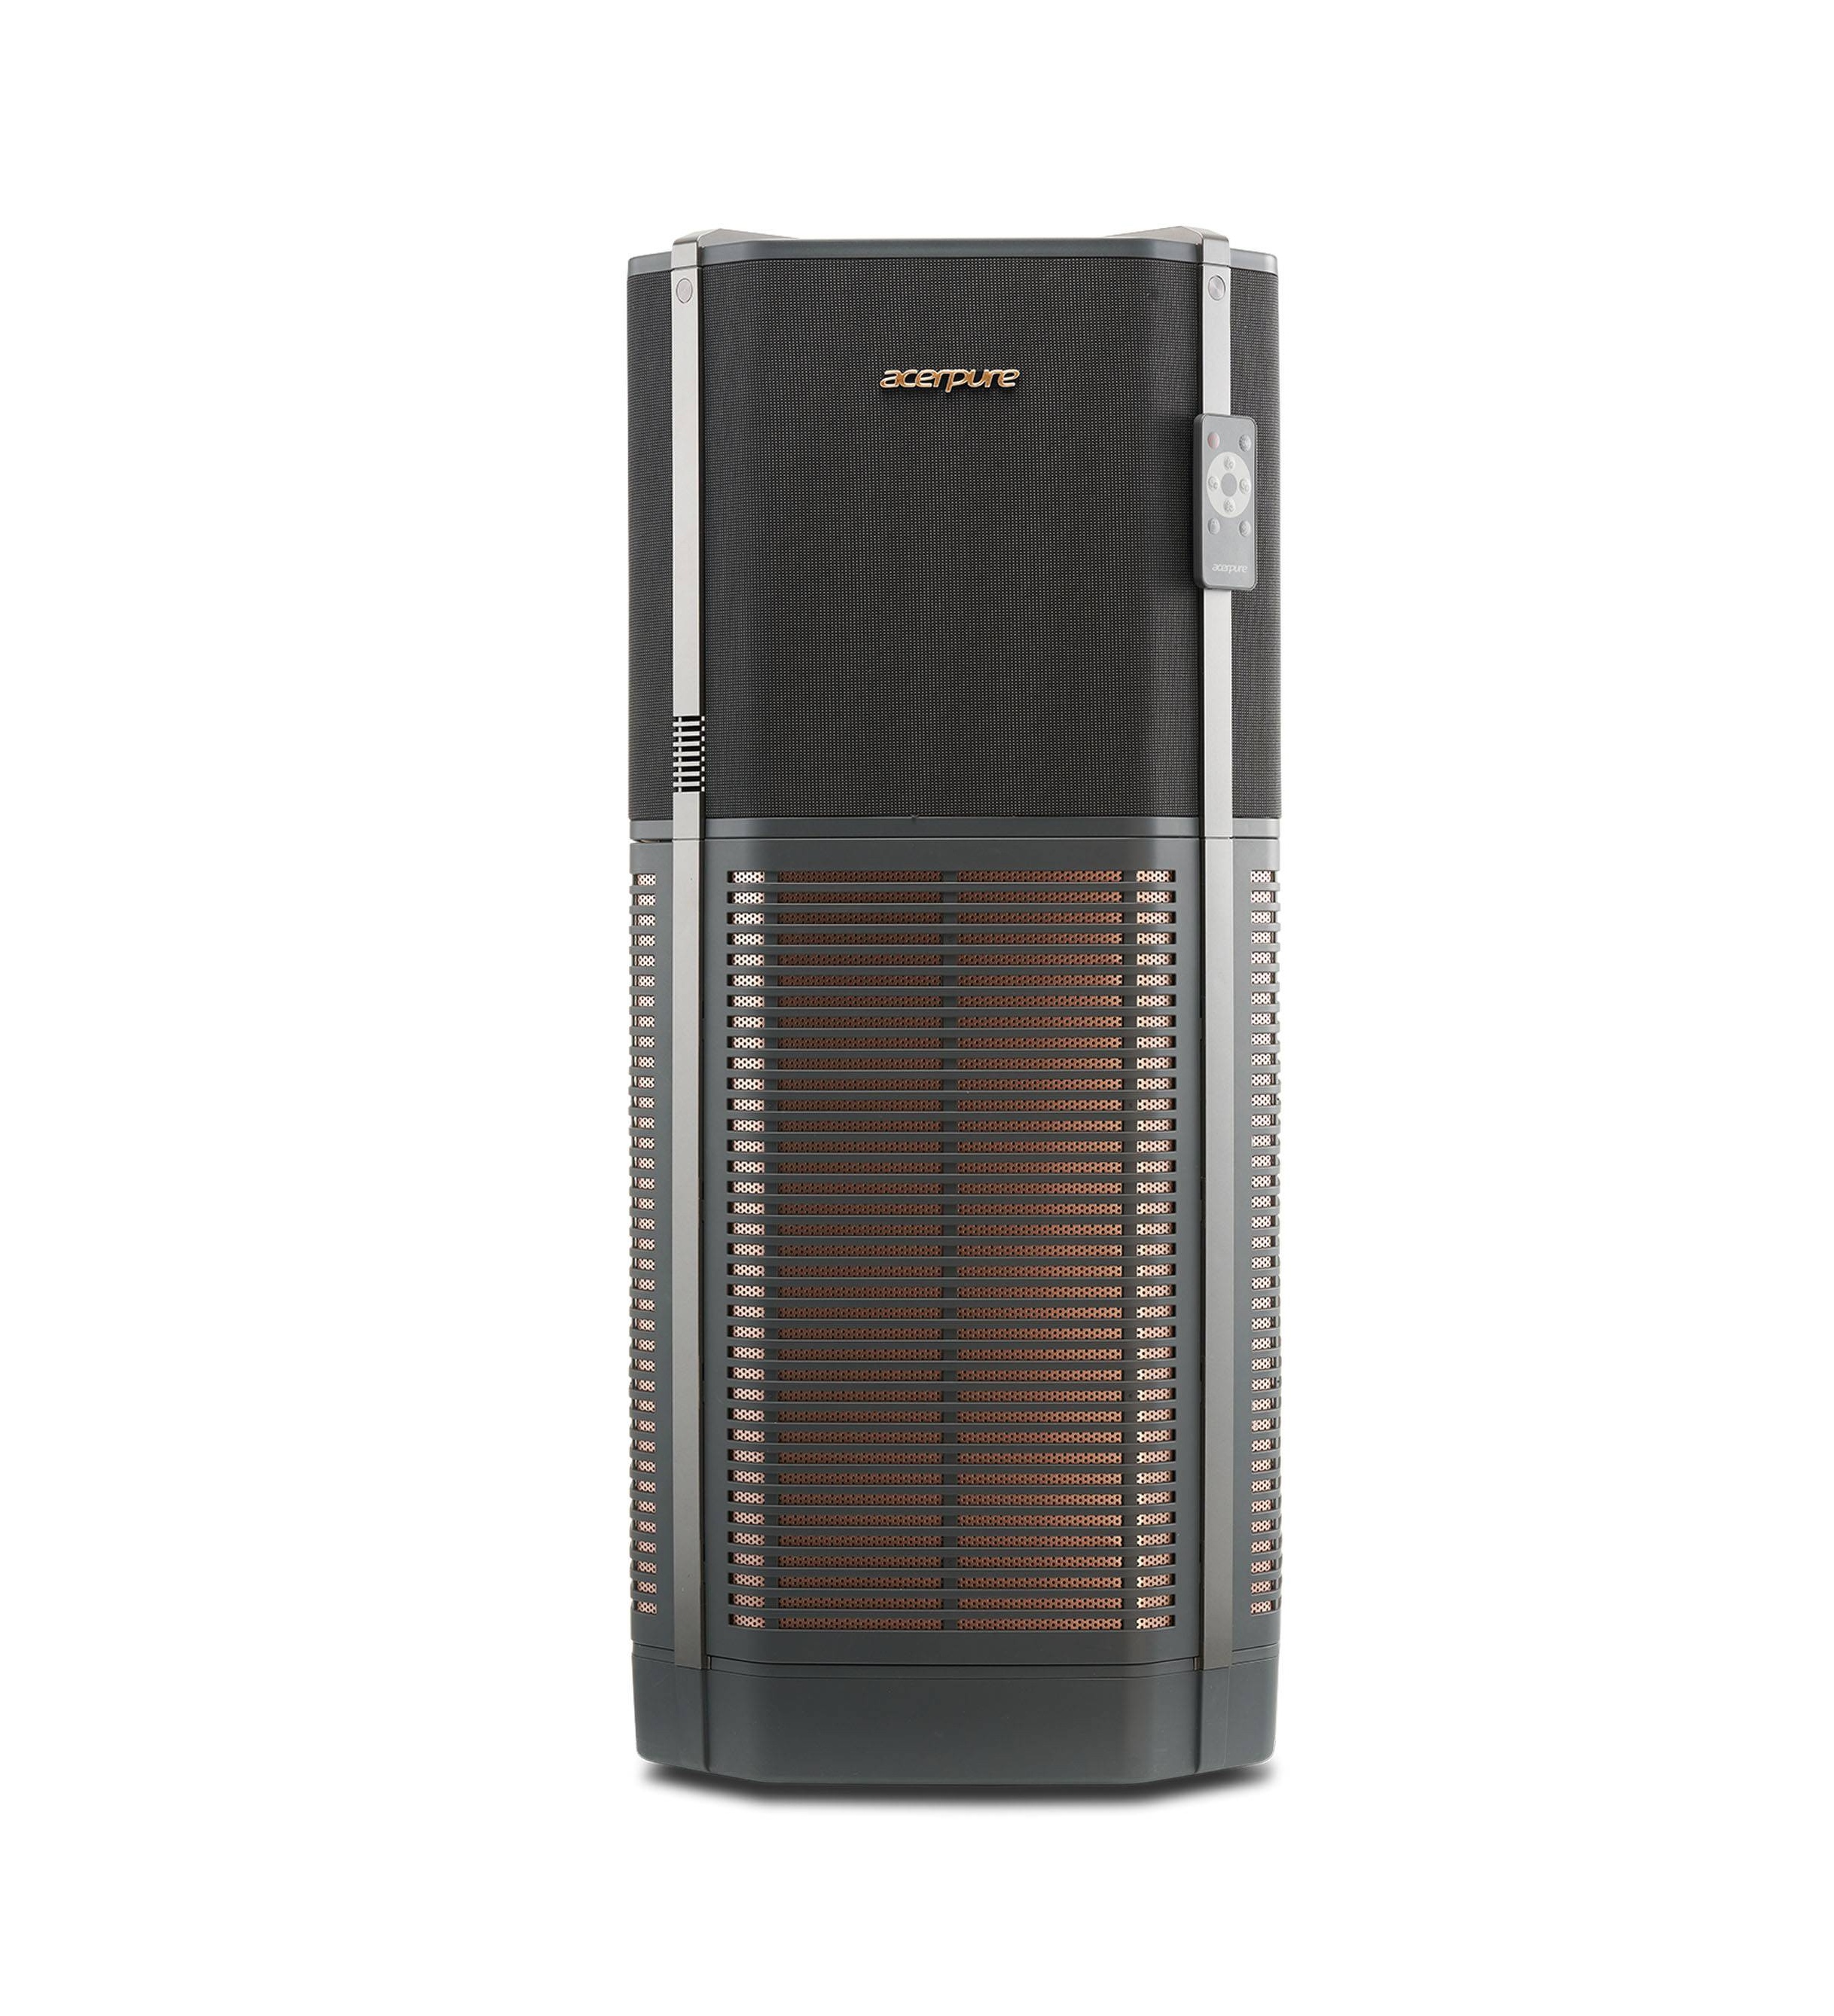 Acerpure Pro P3 Air Purifier-review malaysia